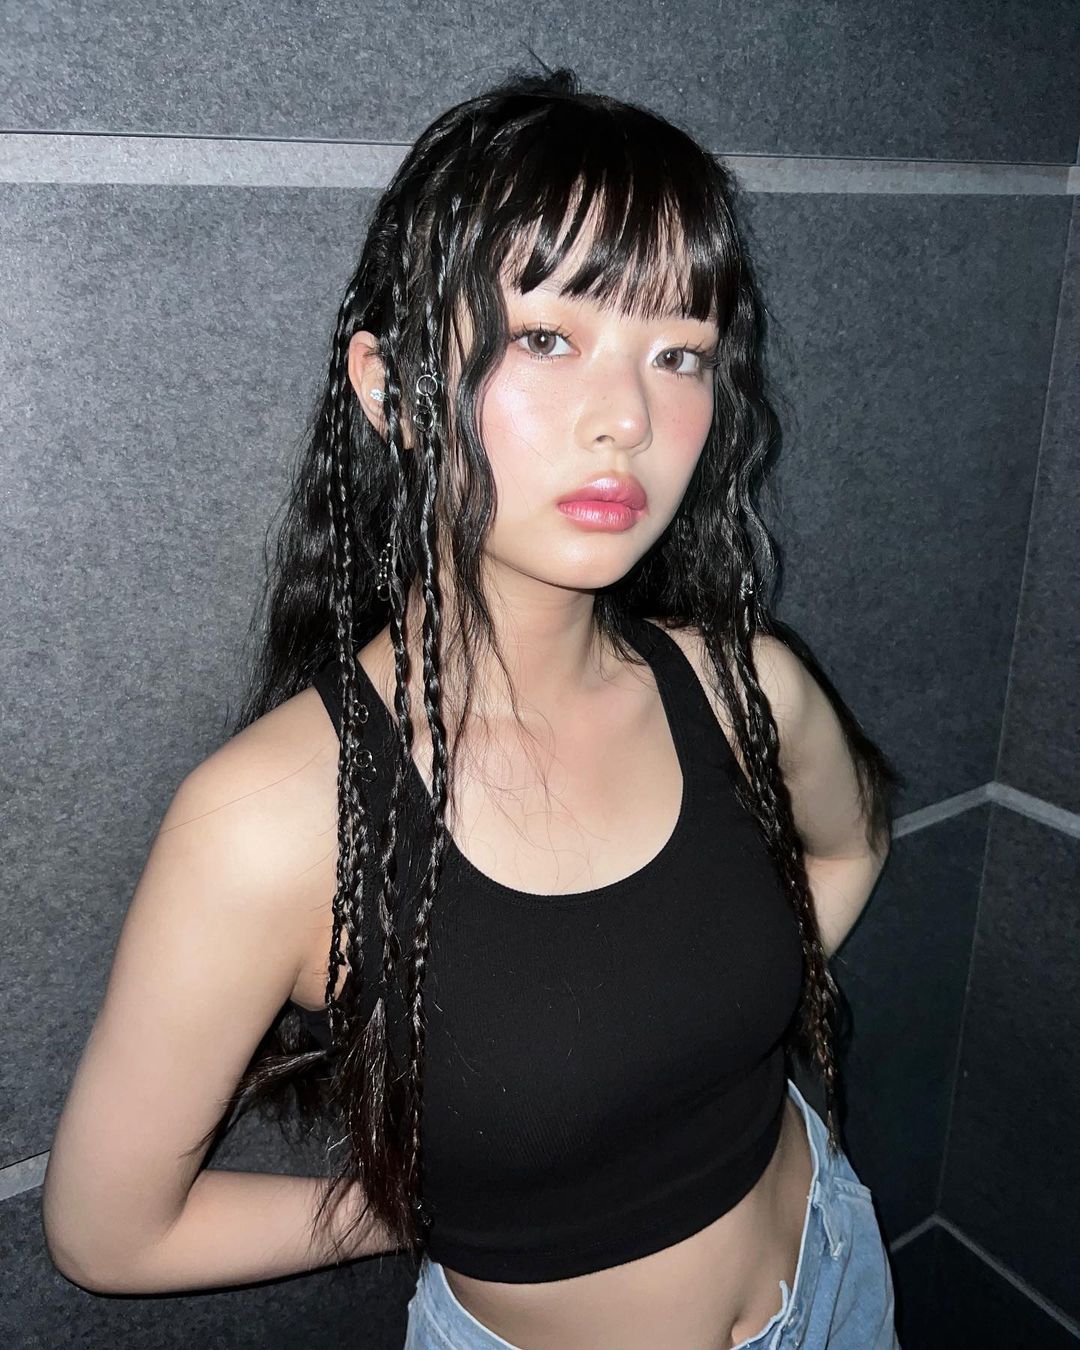 NewJeans' Hanni Is a Rising K-Pop Star: Age, Debut Details